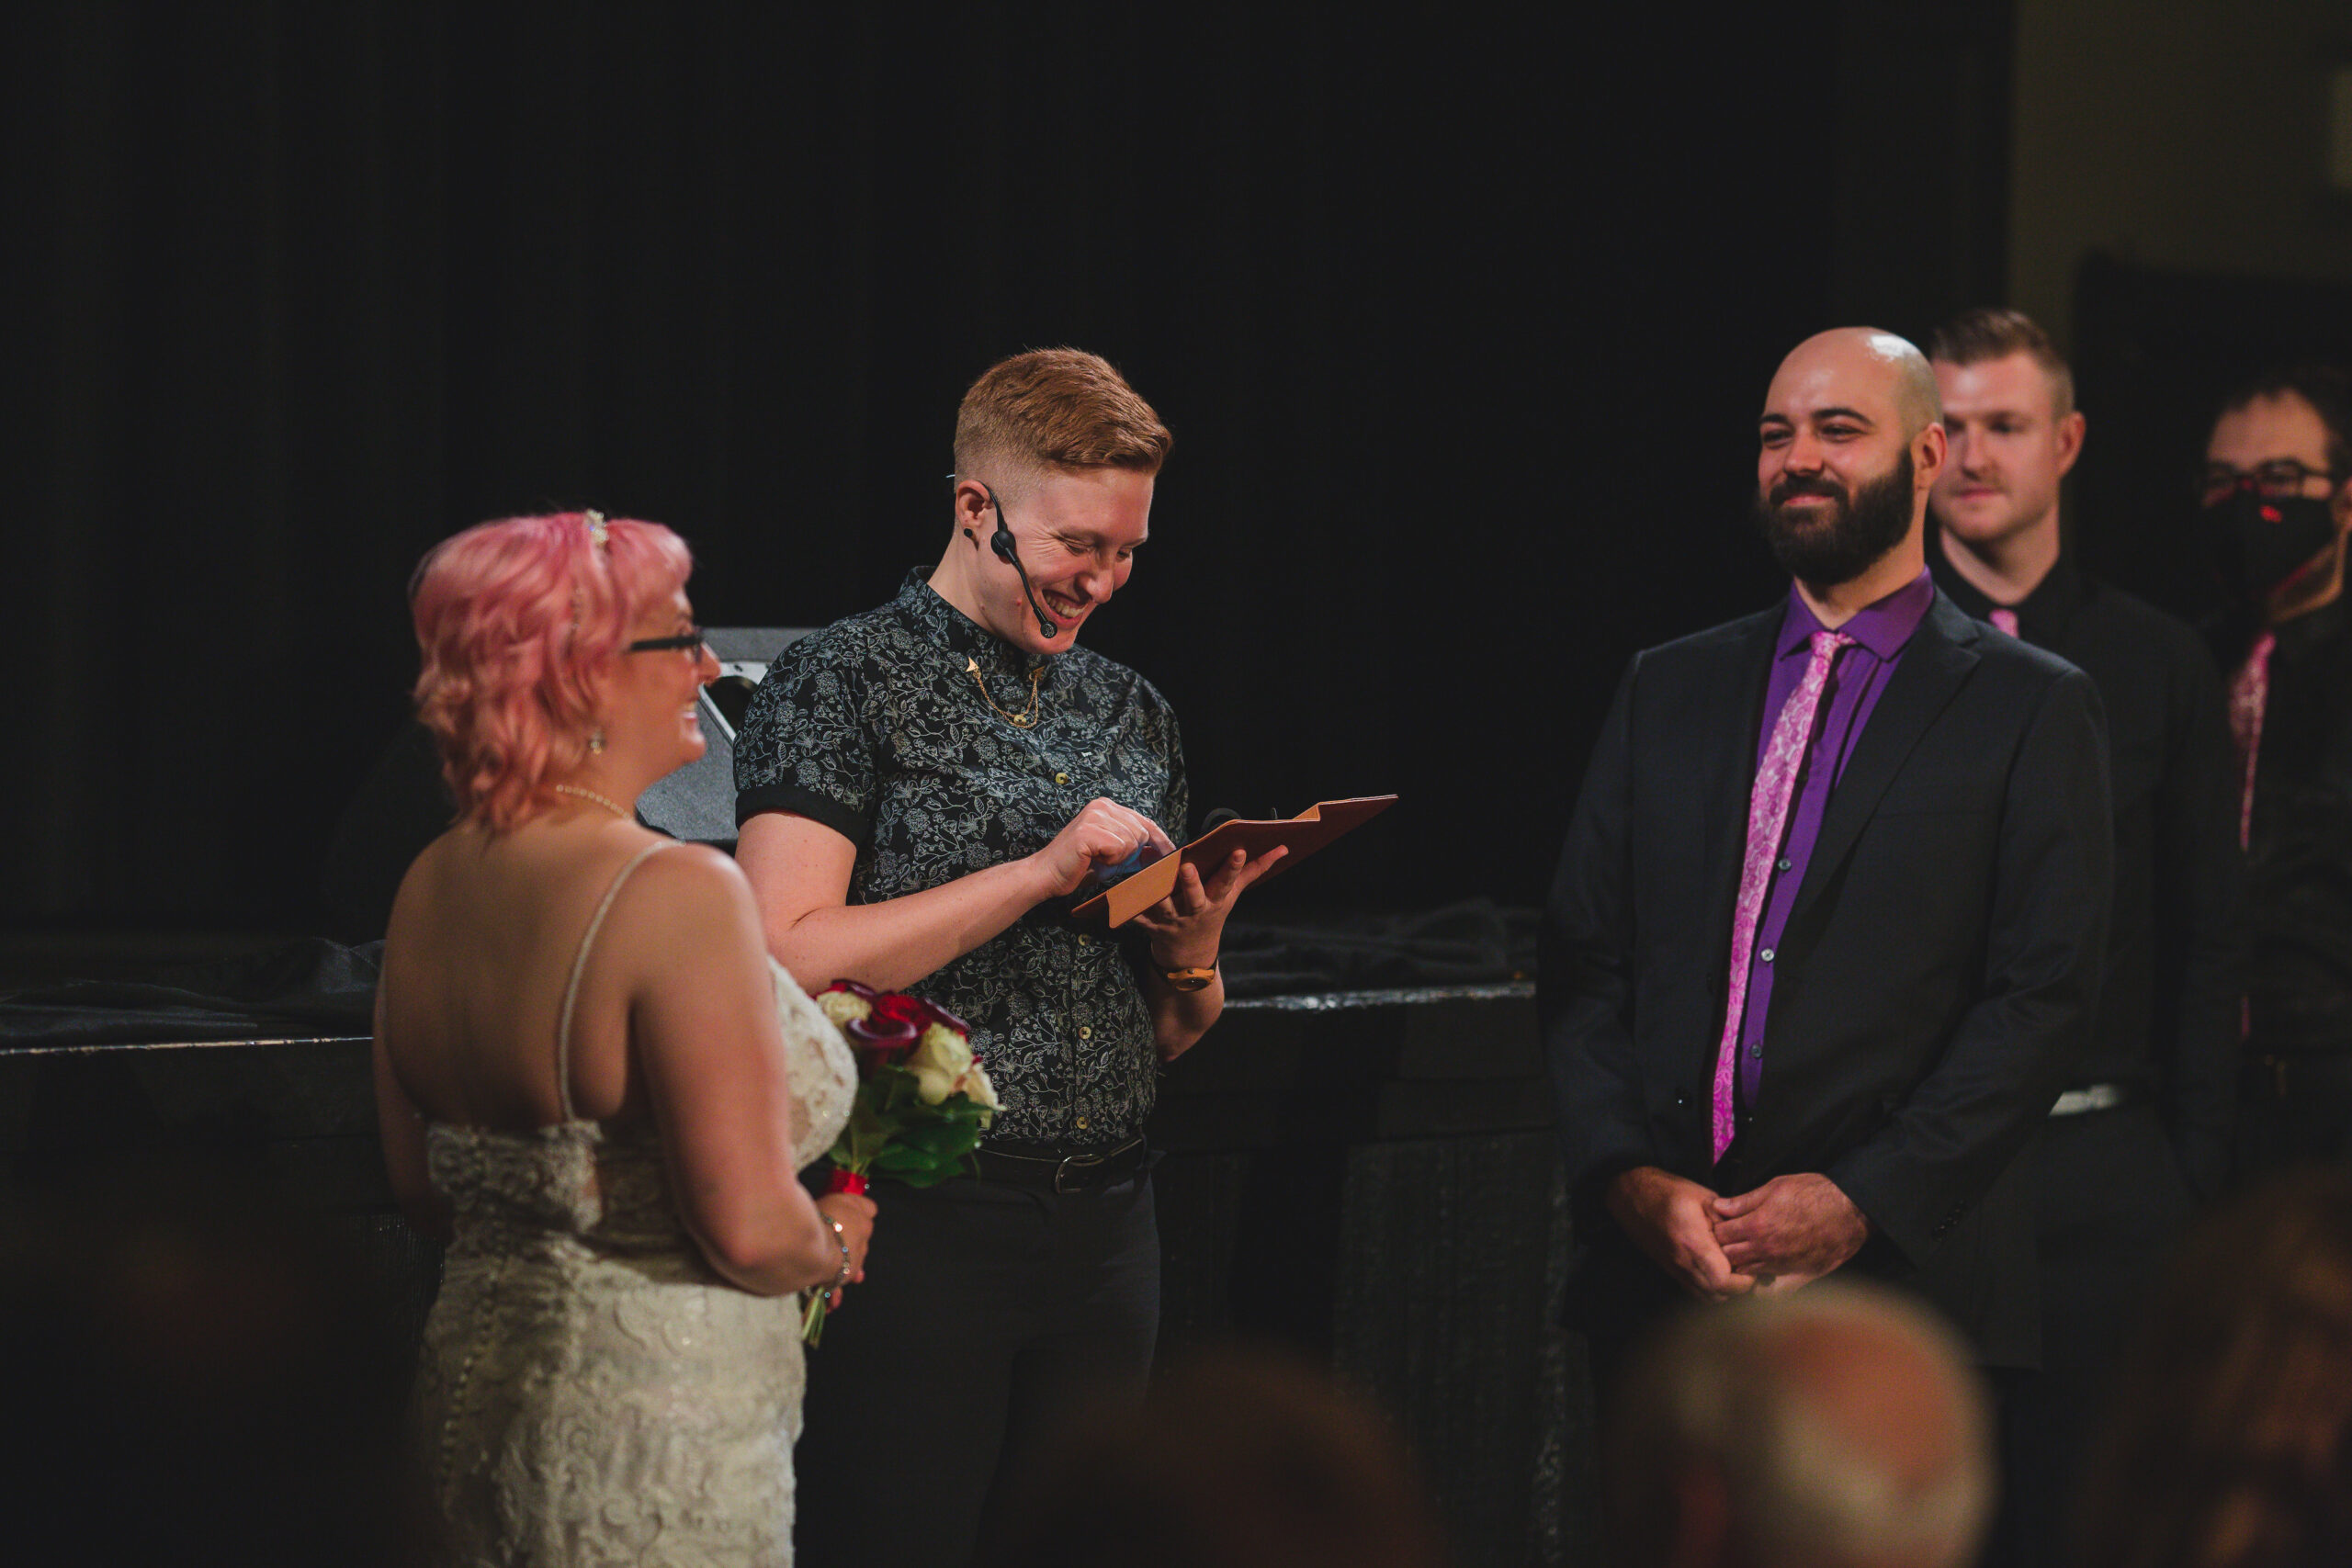 Officiant Beth from Young Hip & Married marries Michaela and Shafer